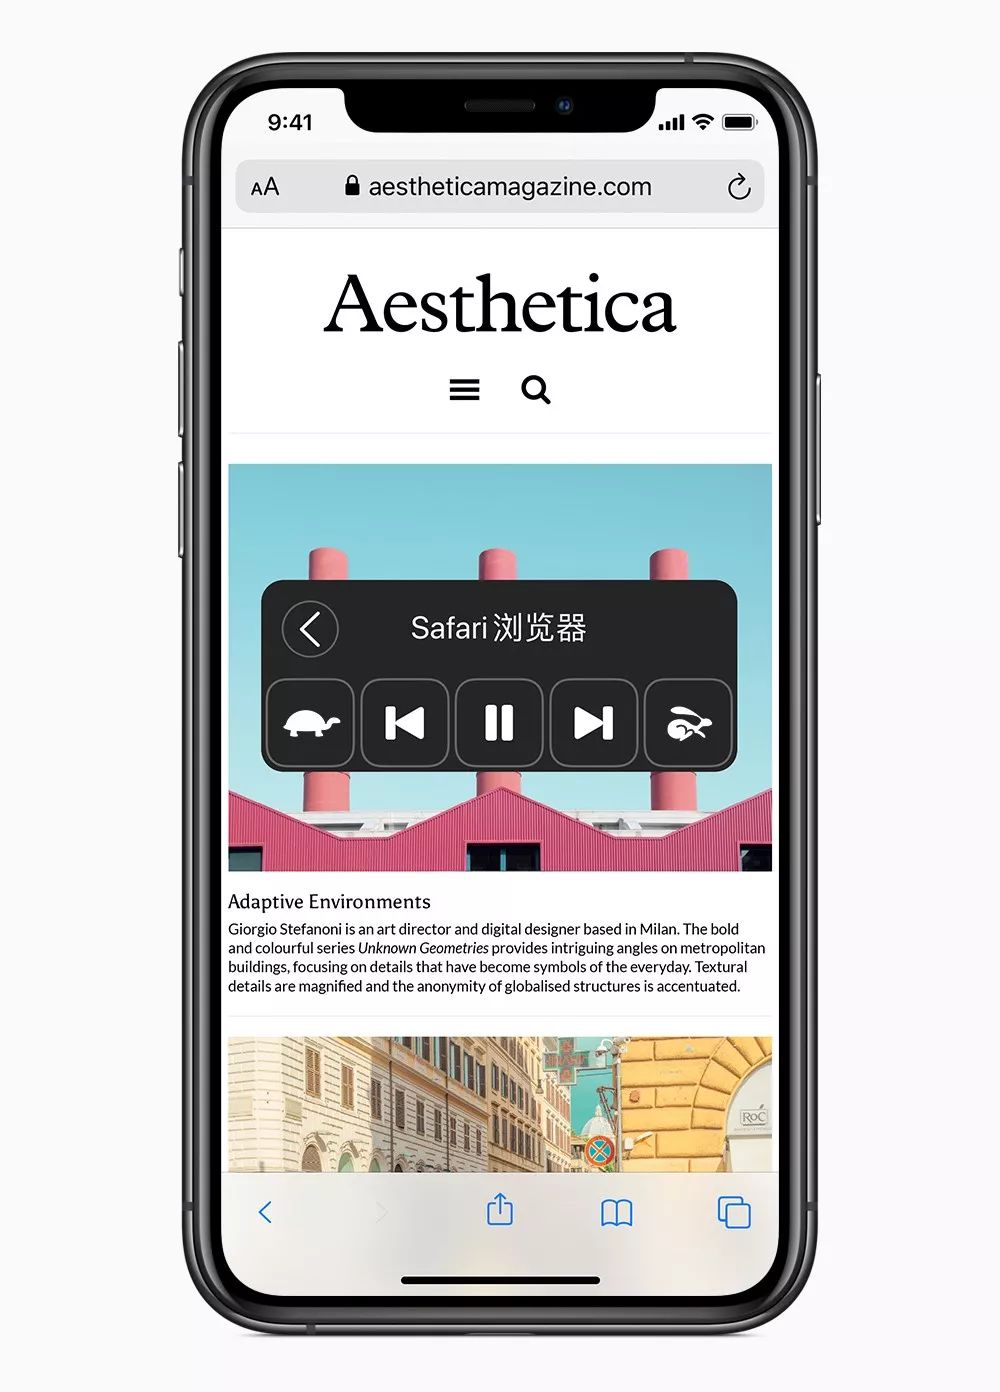 Apple's design philosophy and UI articles